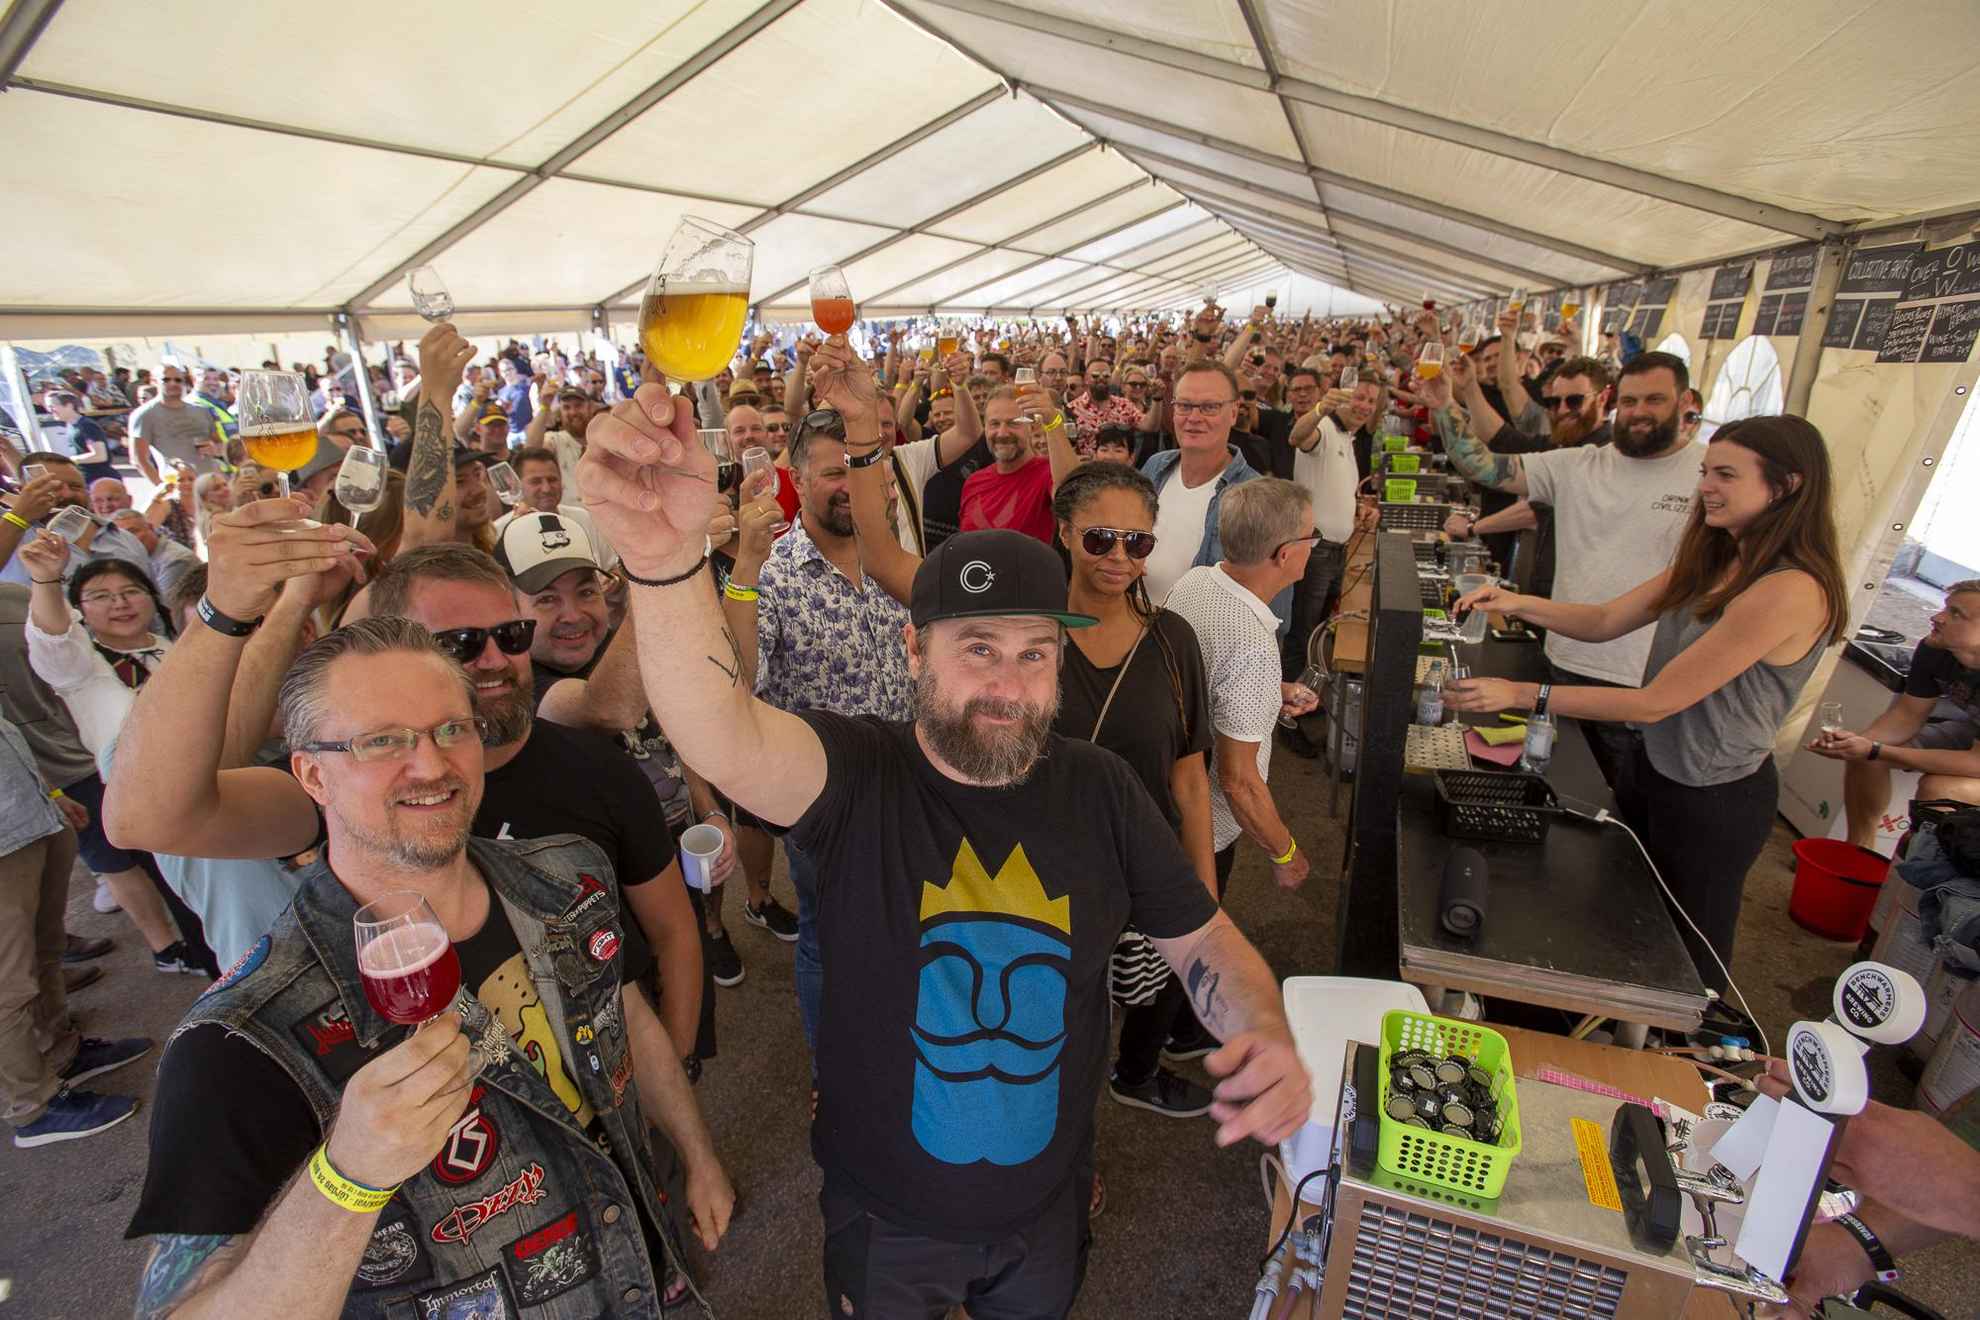 A tent at the Brewskival festival filled with people raising their glasses filled with beer towards the camera.